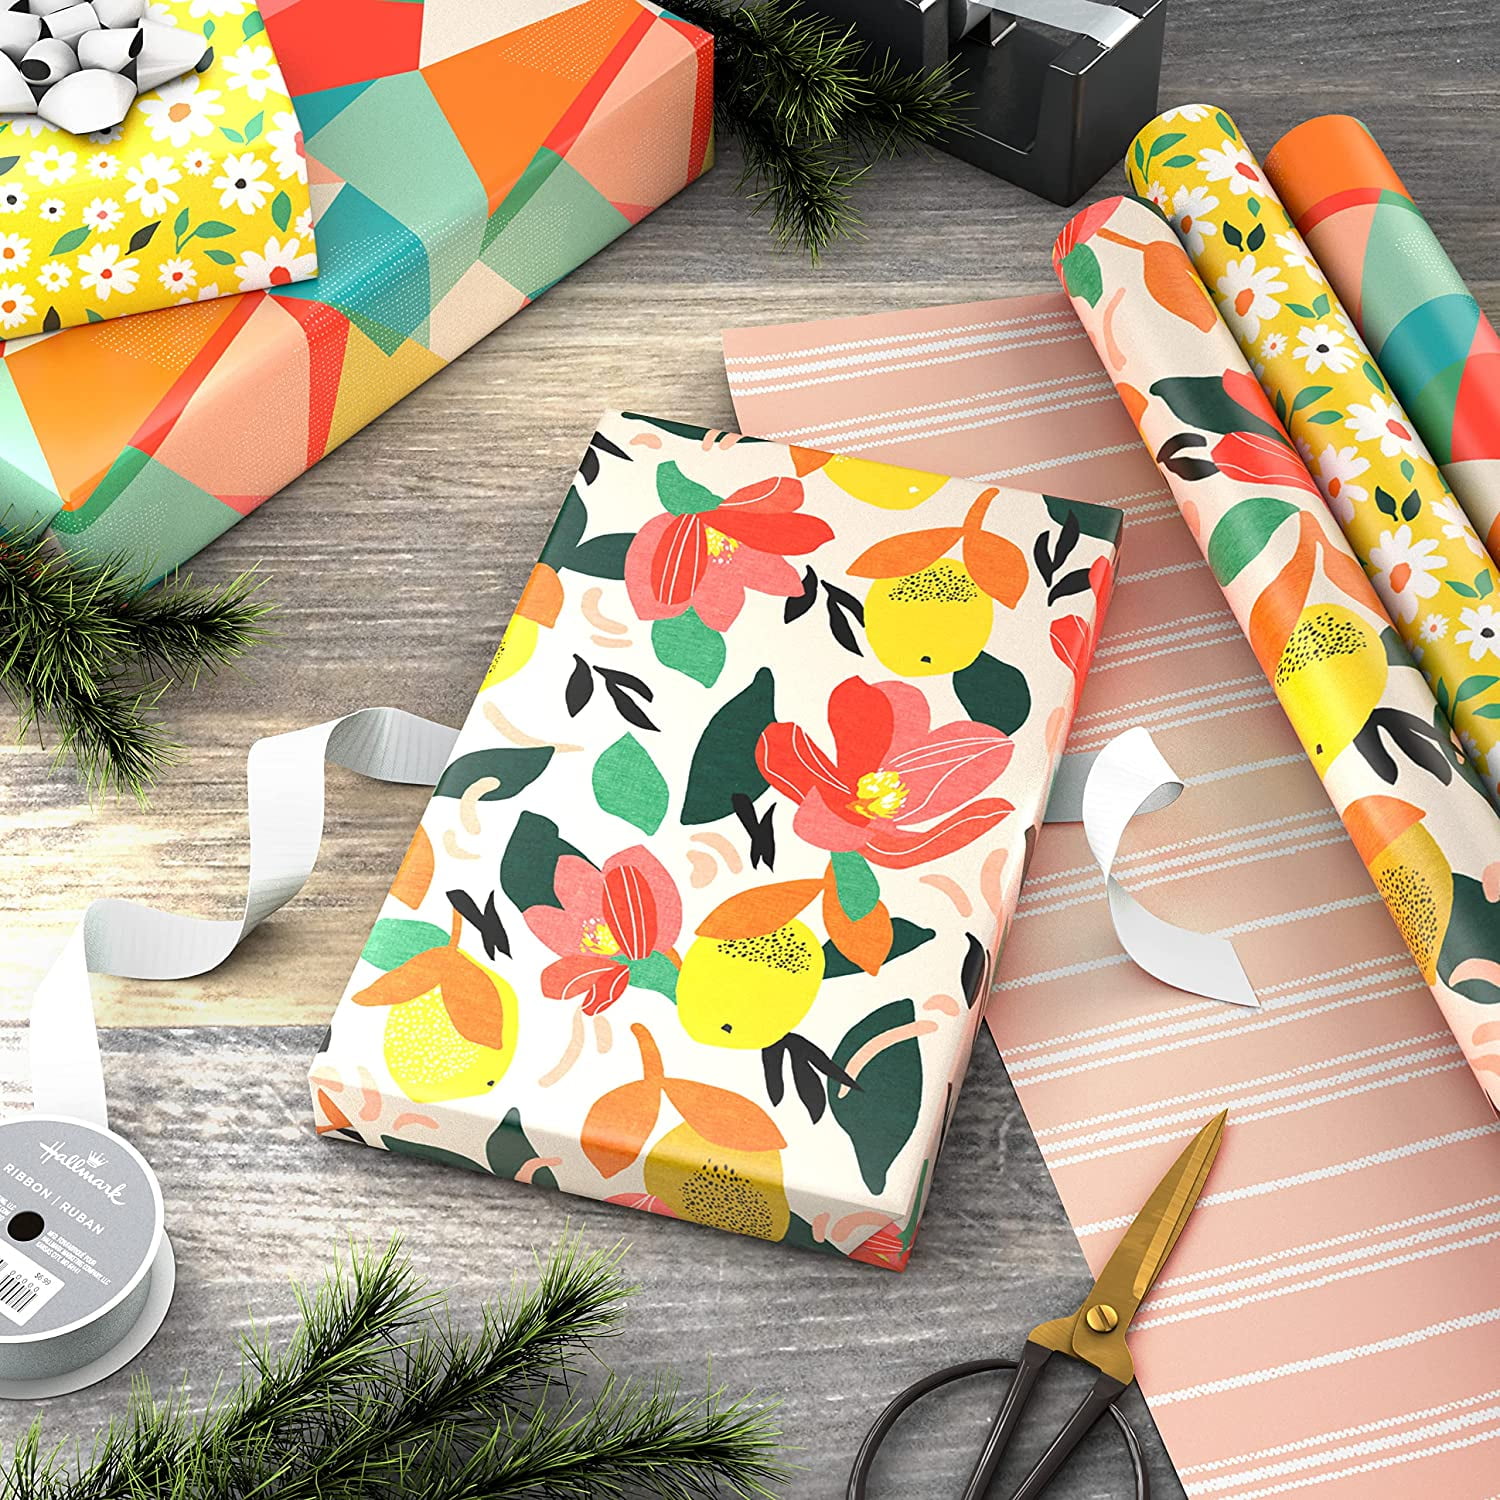 Tropical Fruit and Flowers Wrapping Paper, 20 sq. ft. - Wrapping Paper -  Hallmark